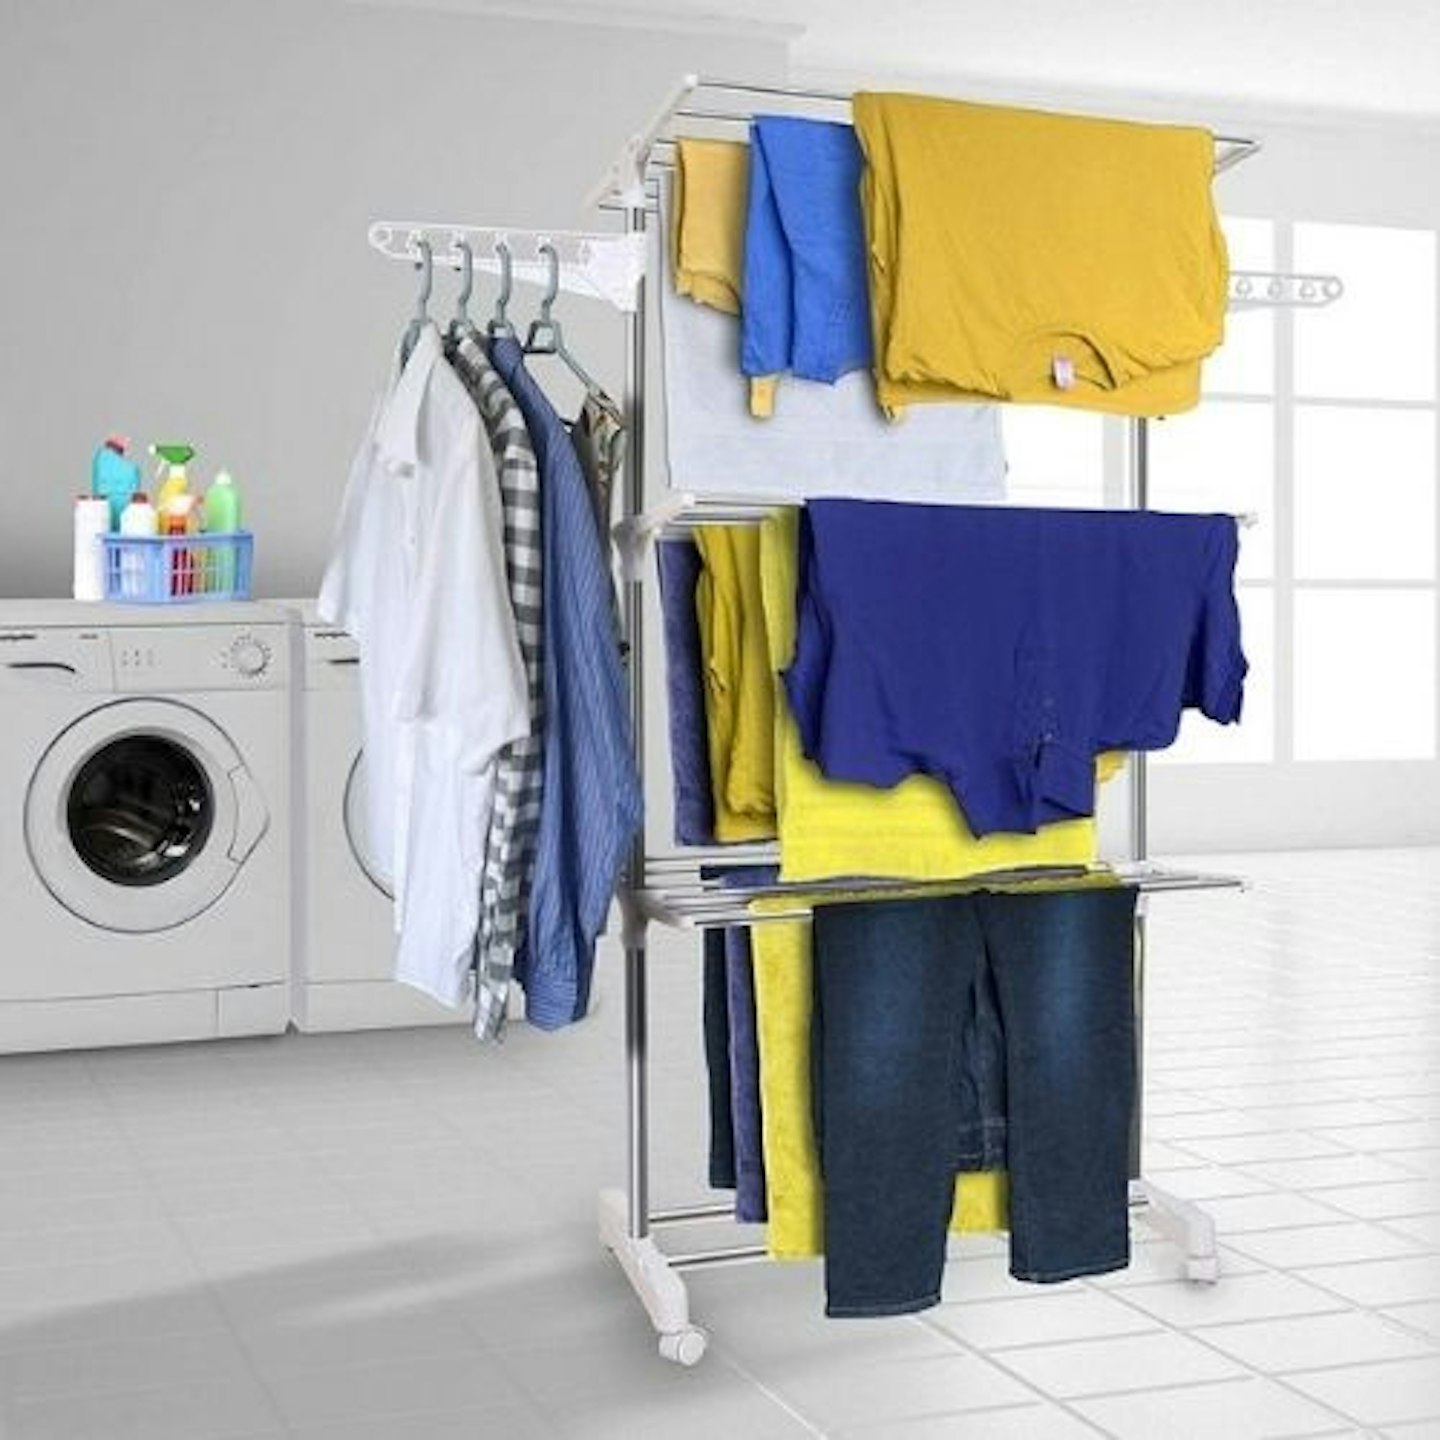 Hyfive Clothes Airer